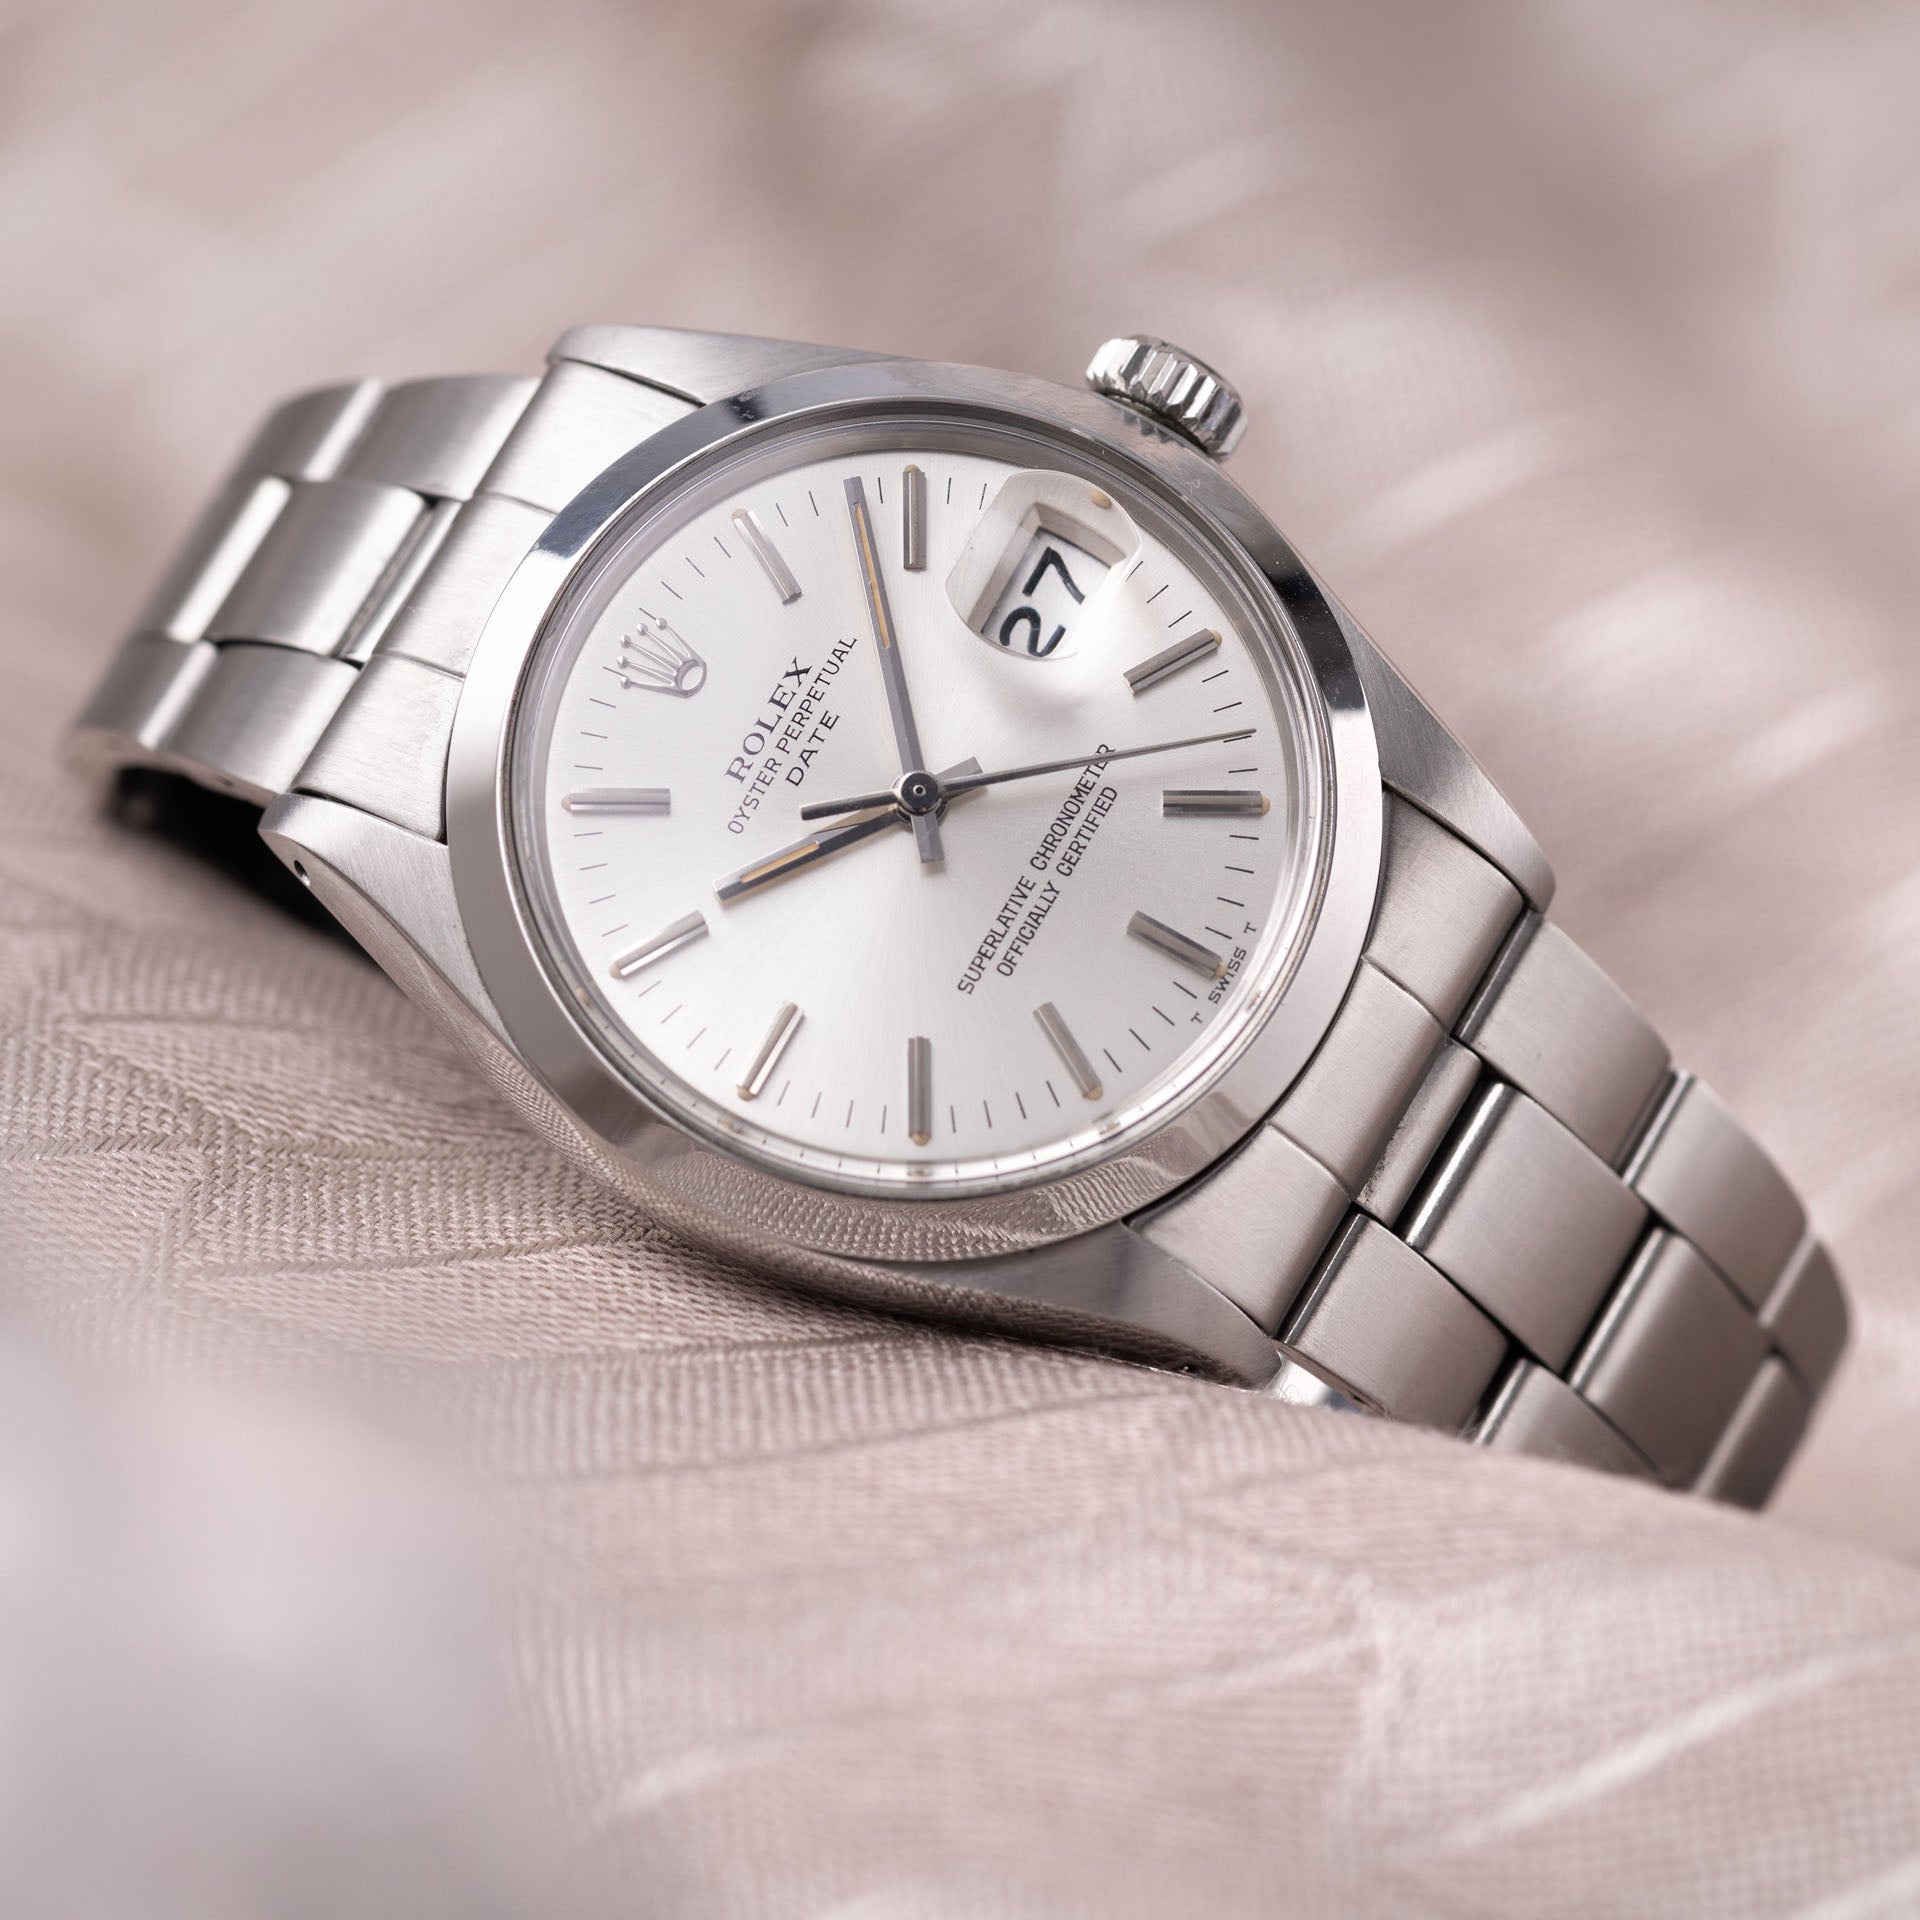 Vintage Rolex 1500 Oyster Perpetual Date Review